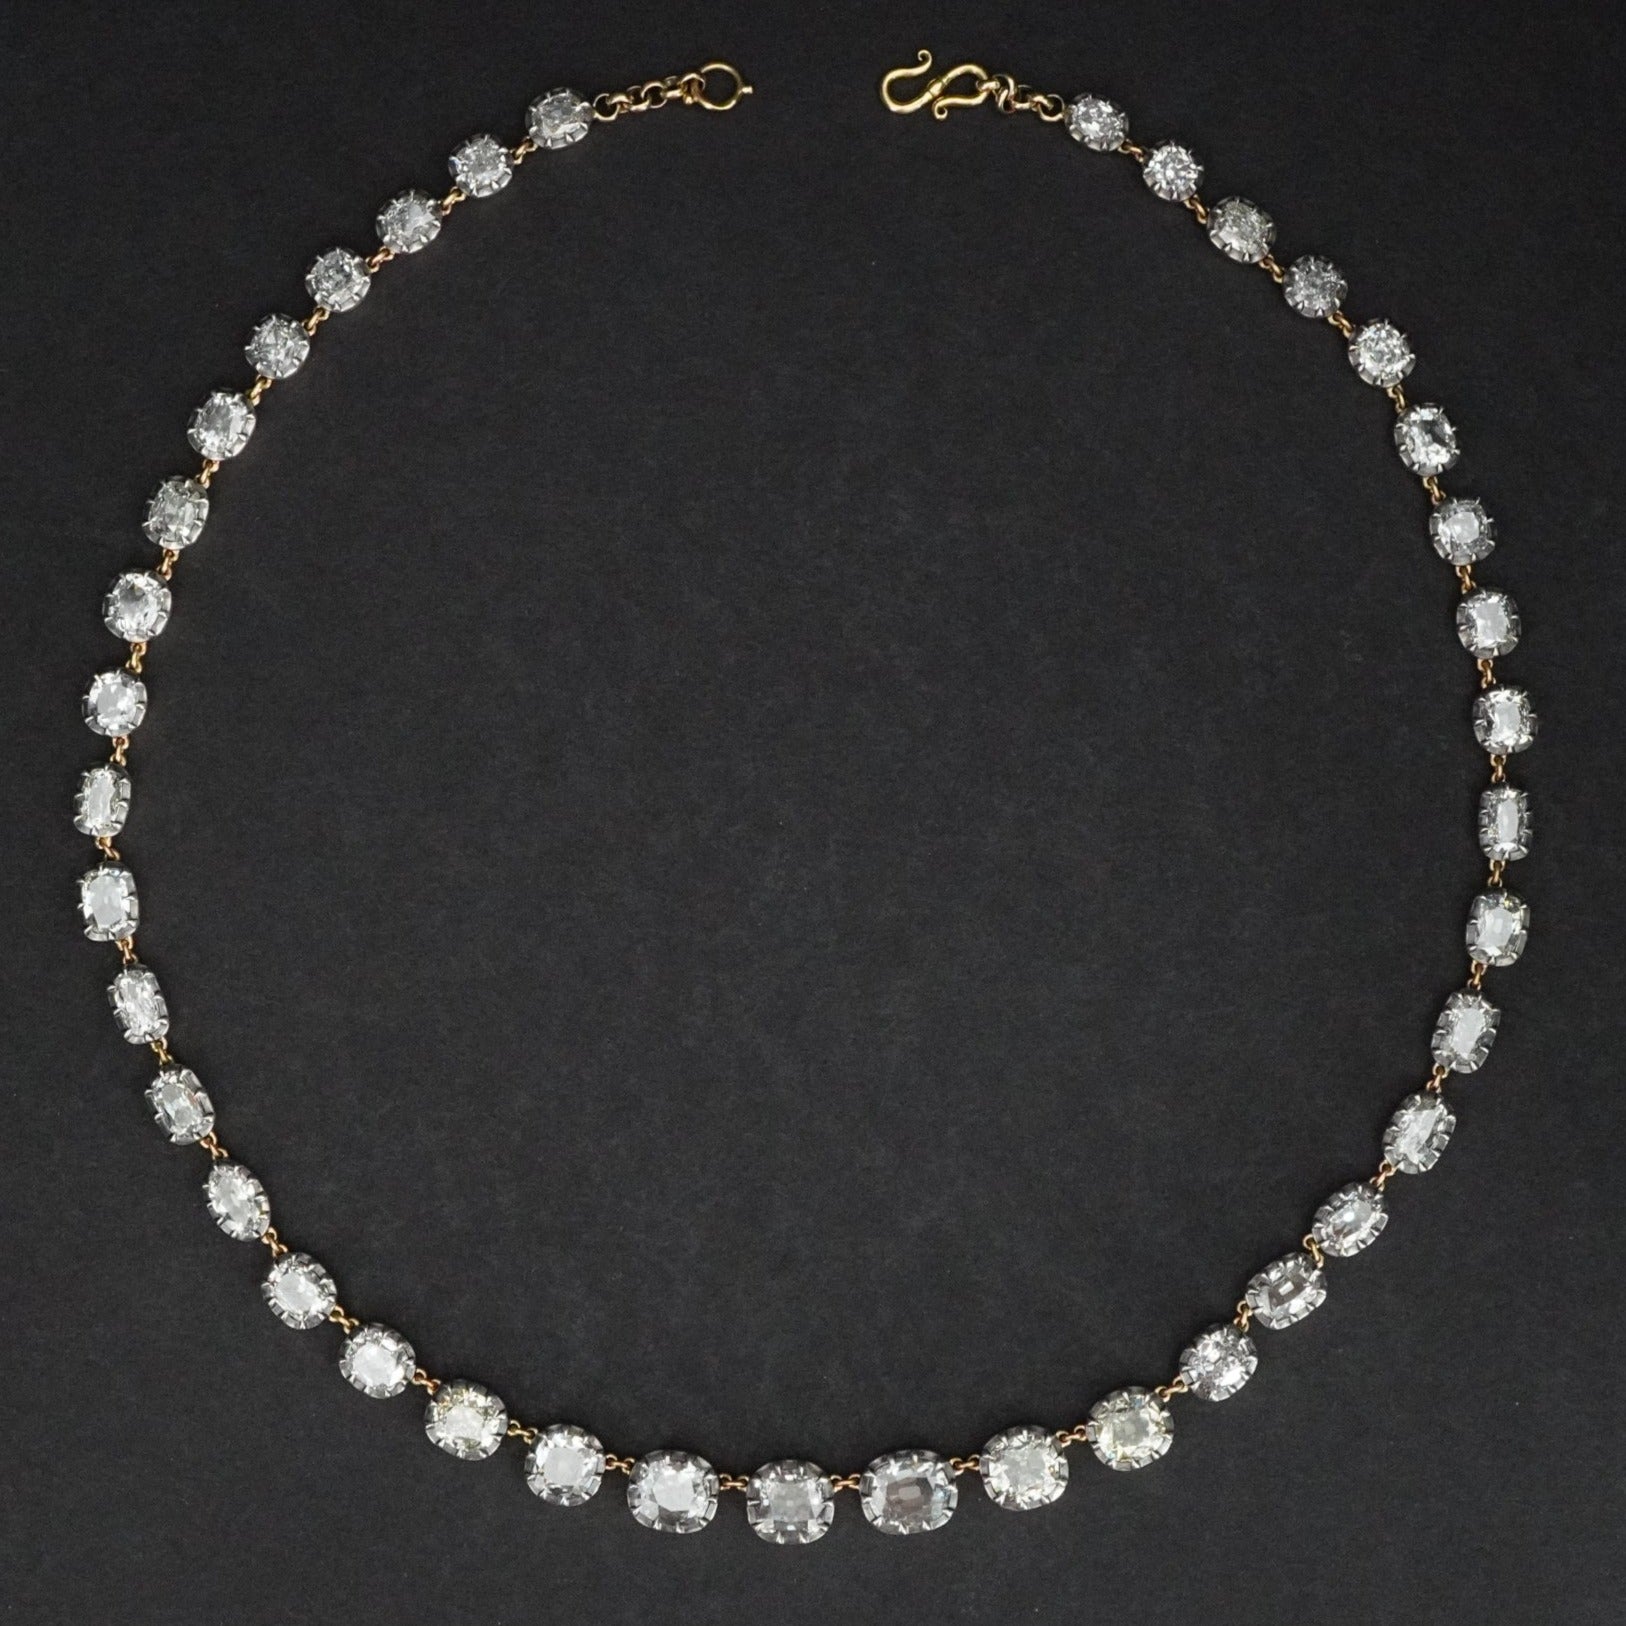 47.52 TCW of 39 Cushion-Cut Diamonds in Gold and Silver Necklace